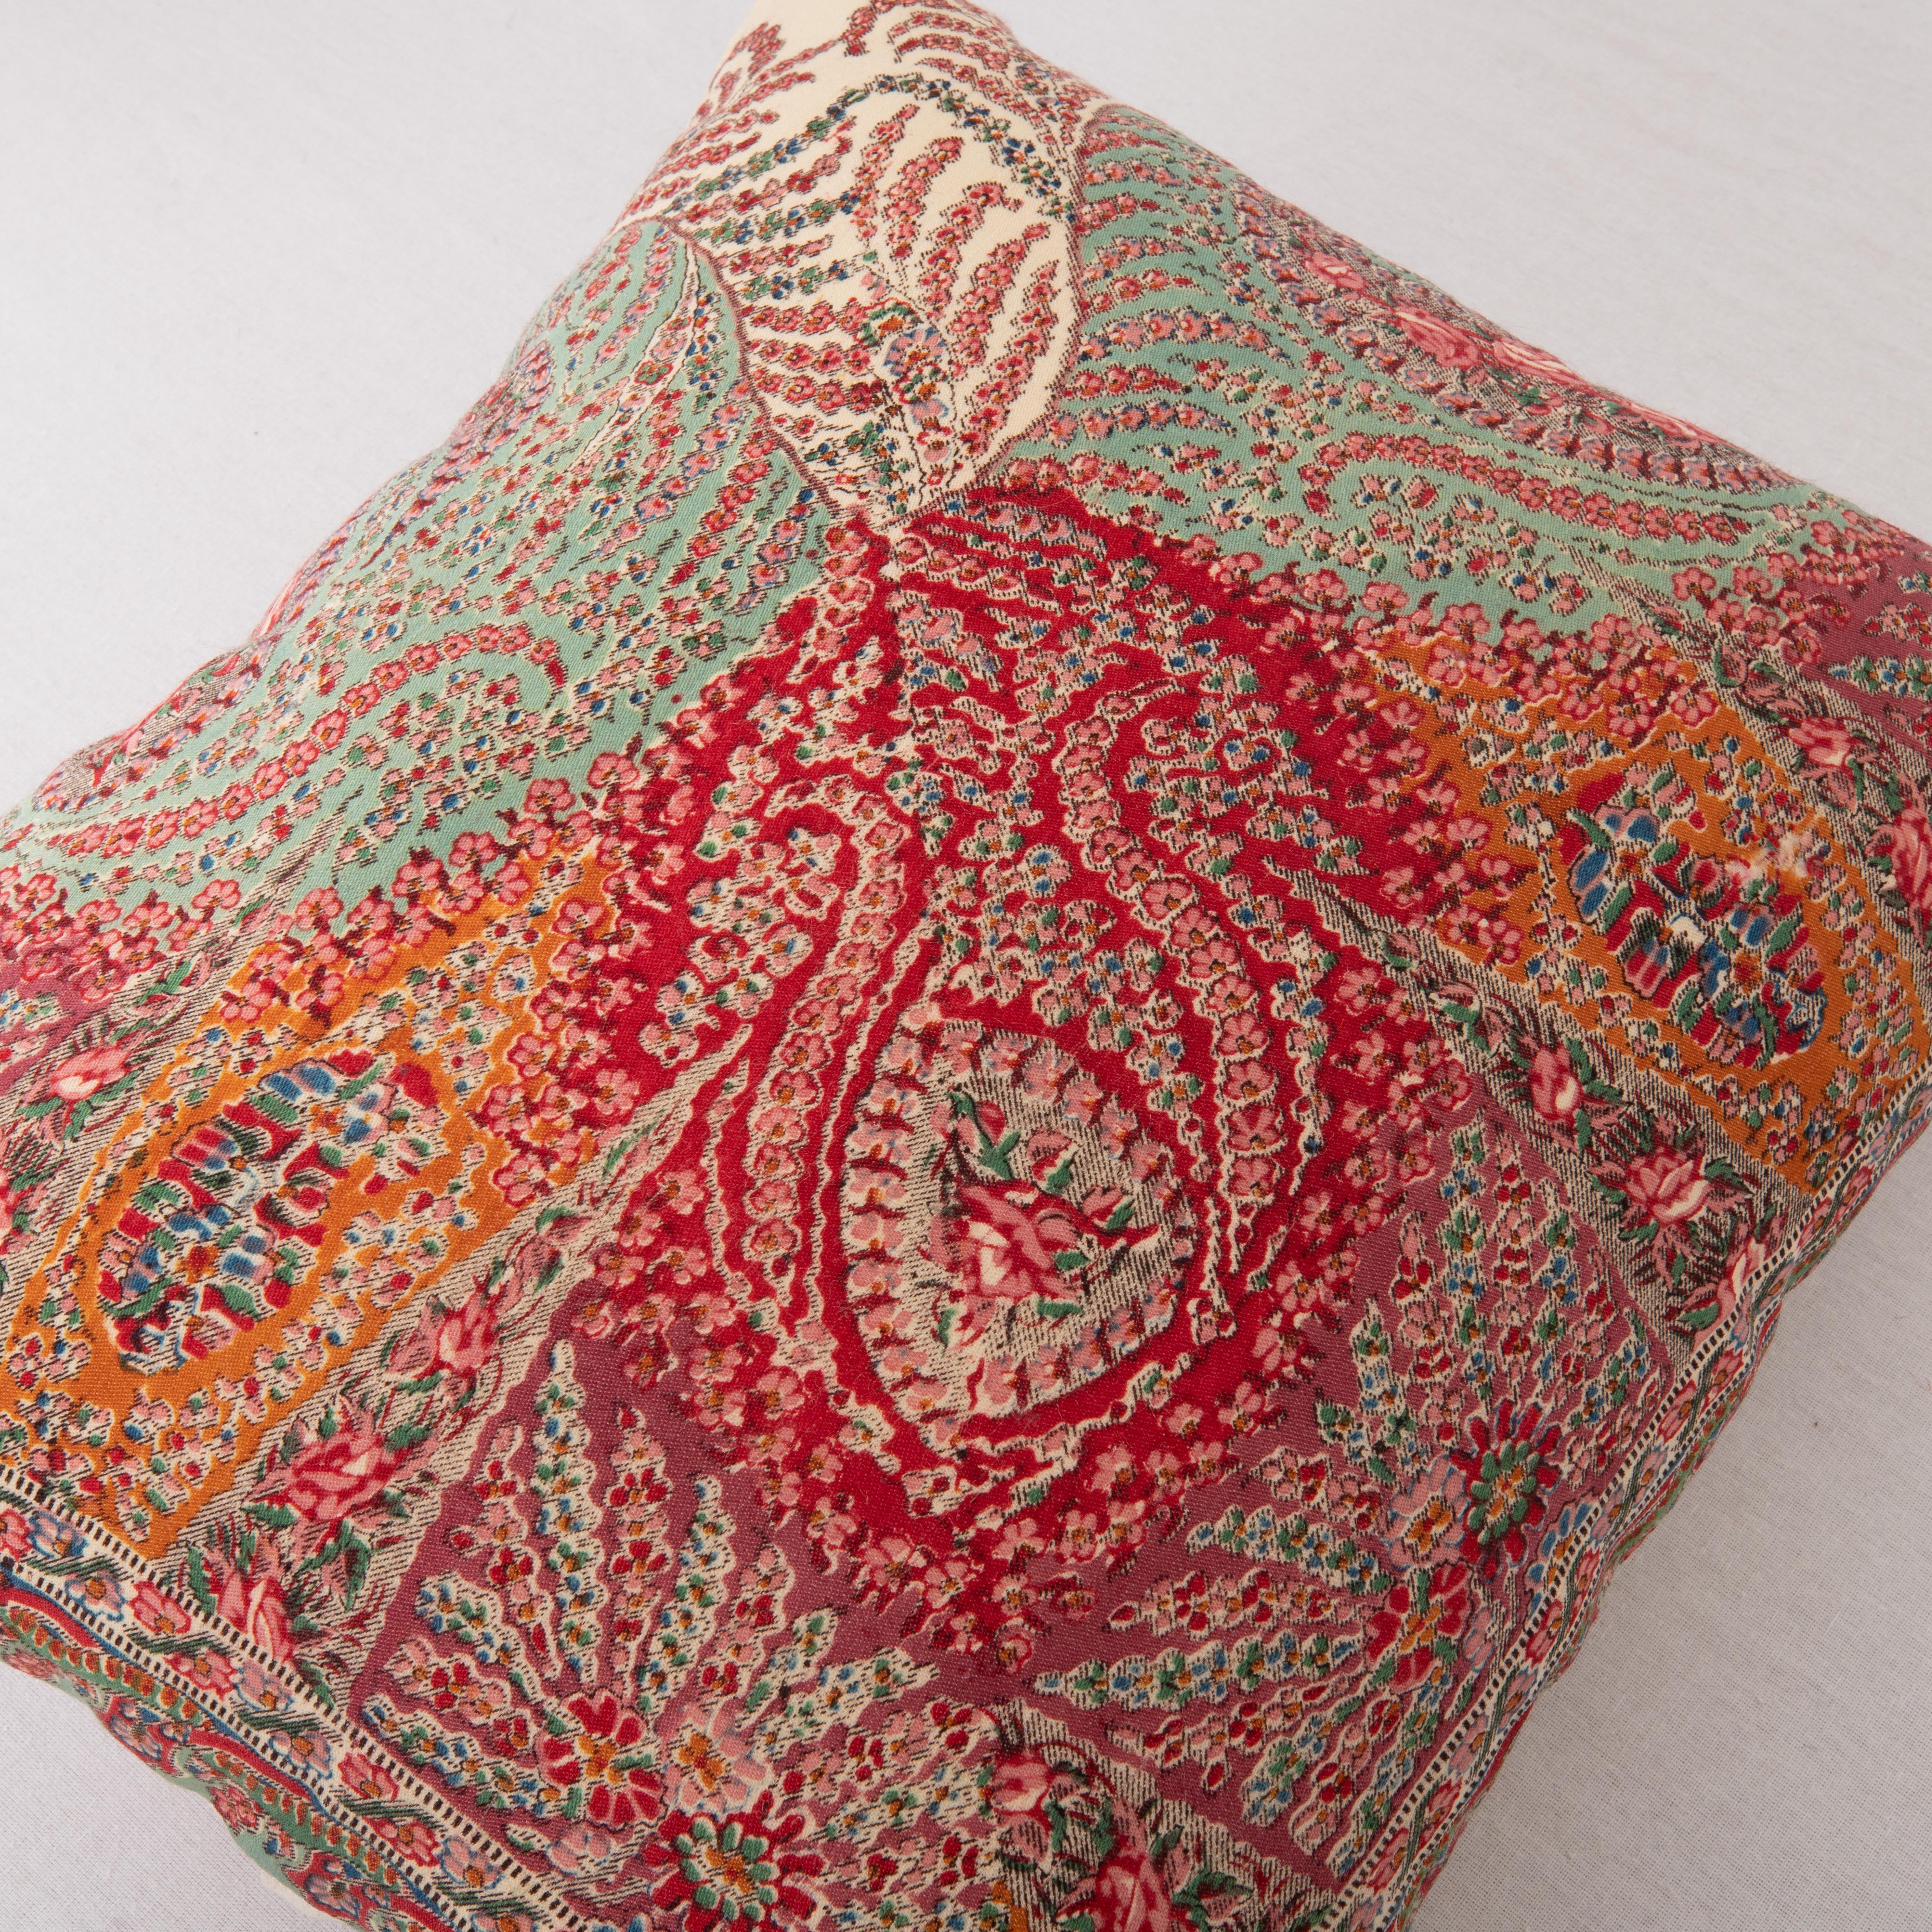  Pillow Cover Made from an English Printed Shawl, 19th C. In Good Condition For Sale In Istanbul, TR